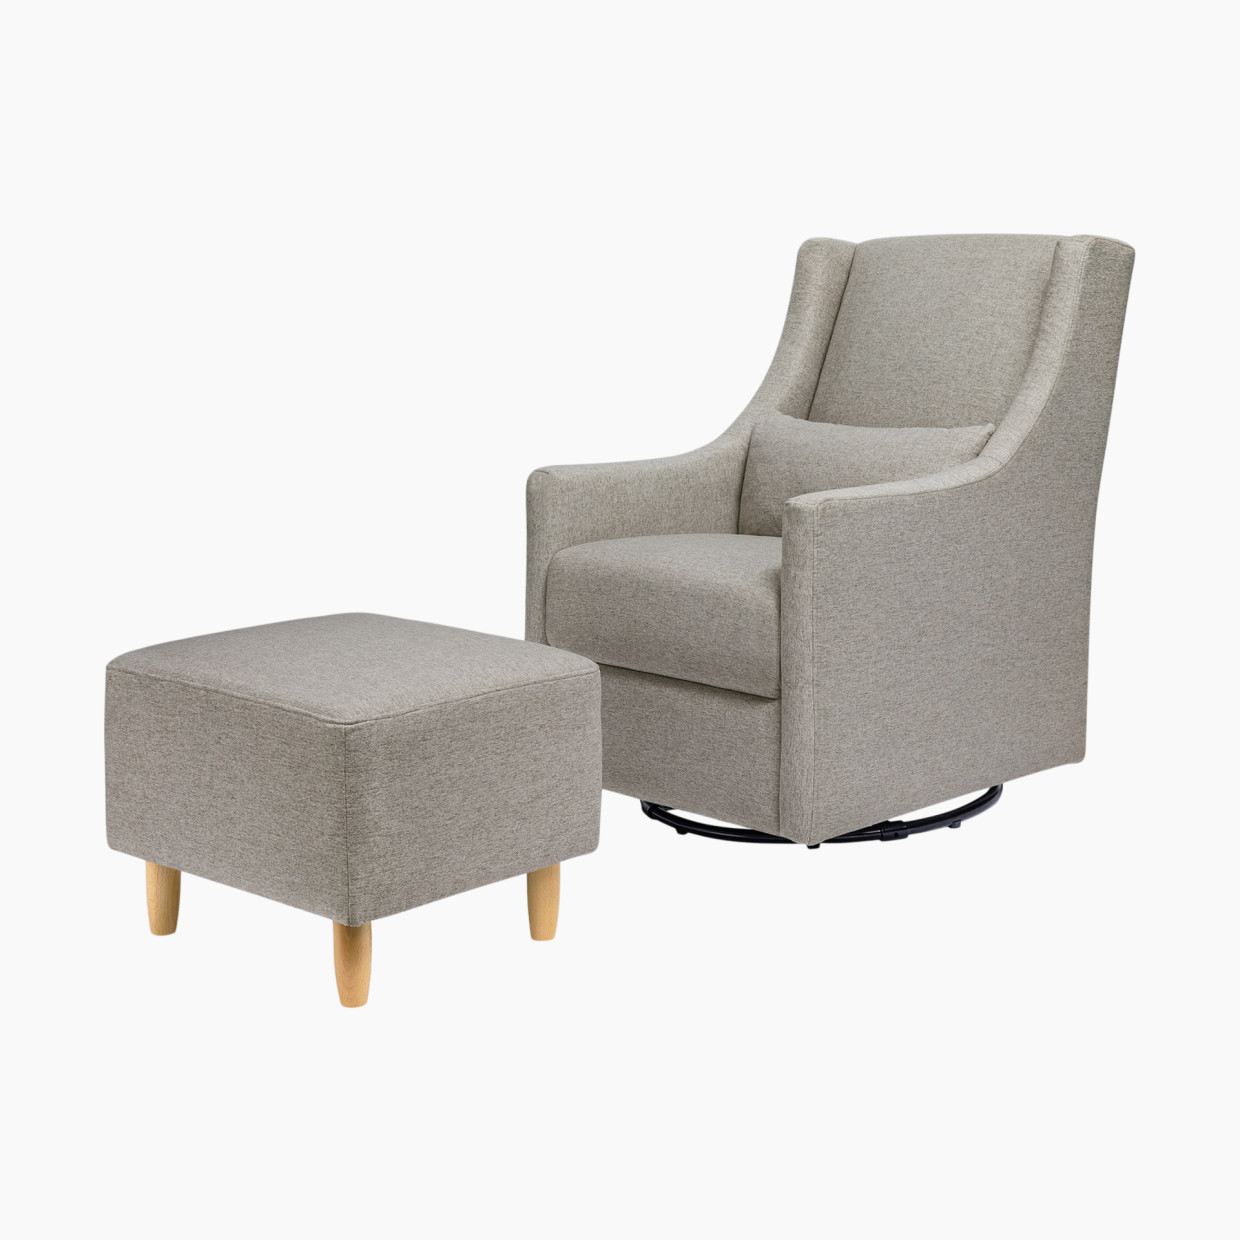 babyletto Toco Swivel Glider and Stationary Ottoman - Performance Grey Eco Weave.